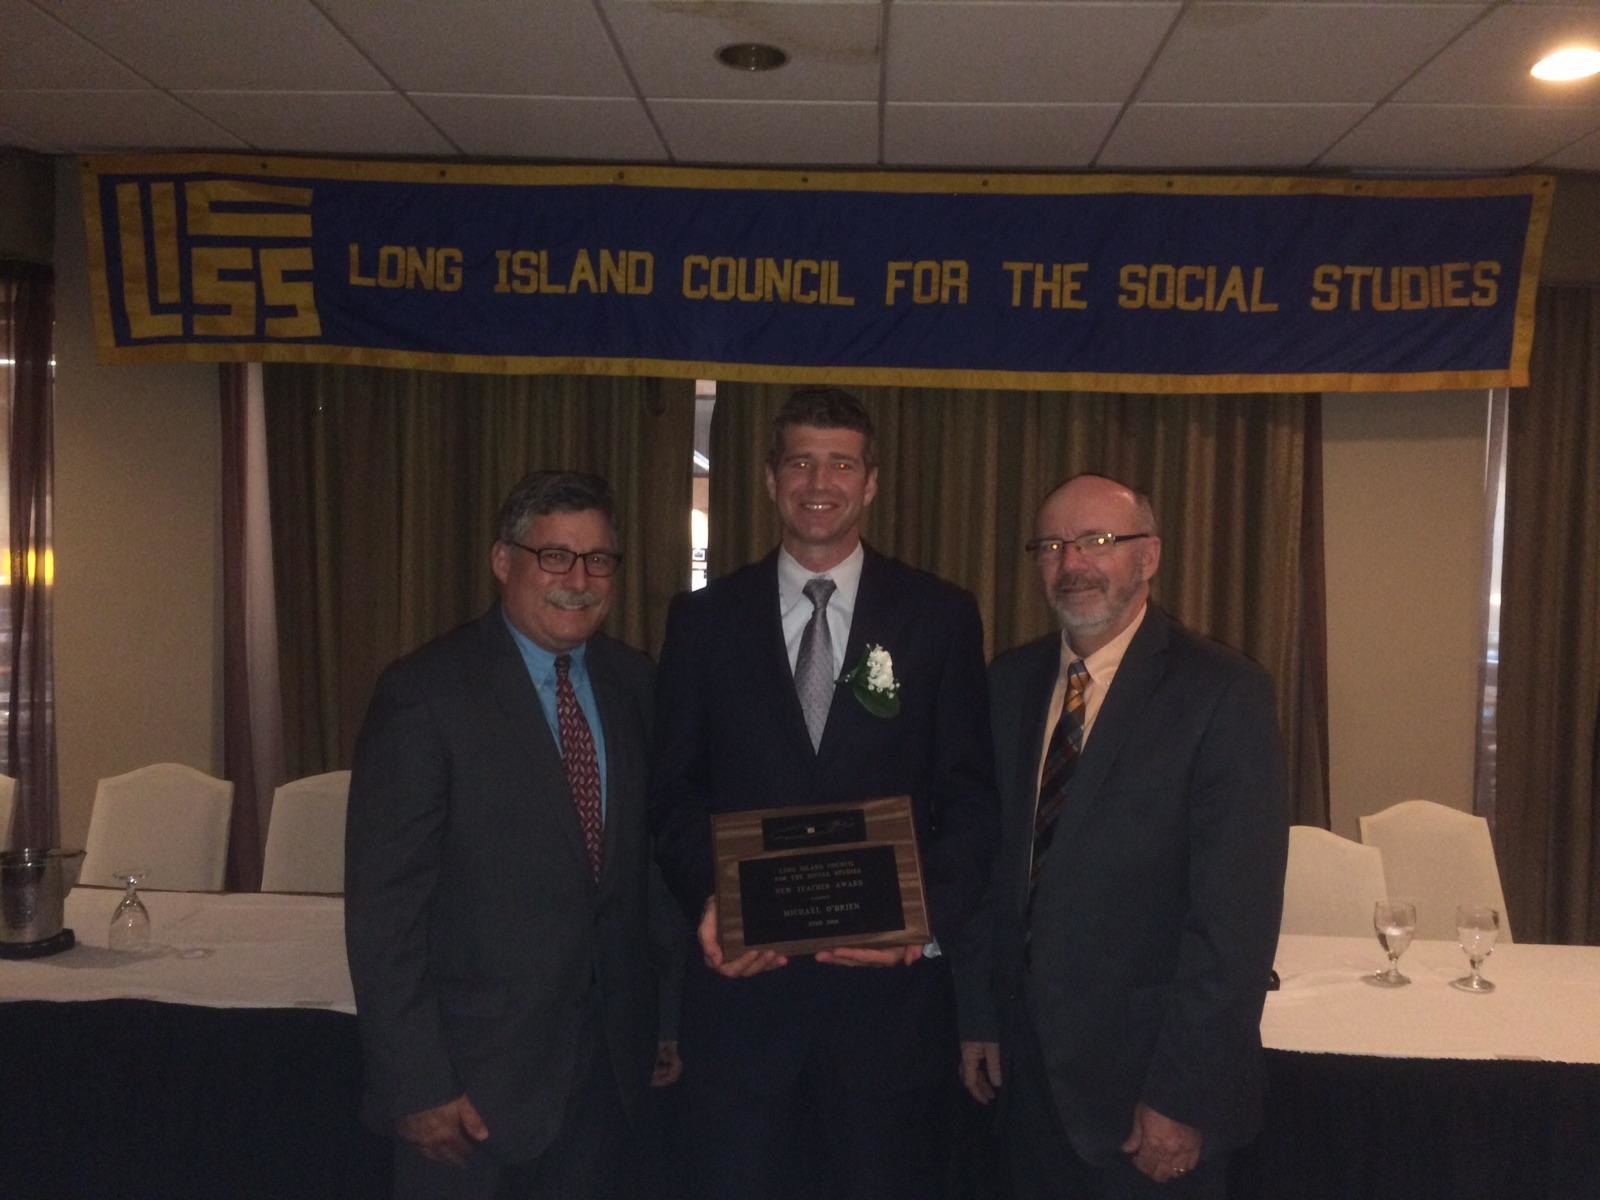 South High School teacher Michael O’Brien, center, was named 2016 New Social Studies Teacher of the Year by the Long Island Council for the Social Studies. He is pictured with South High’s social studies chair, Michael Serif, and LICSS President Brian Dowd.